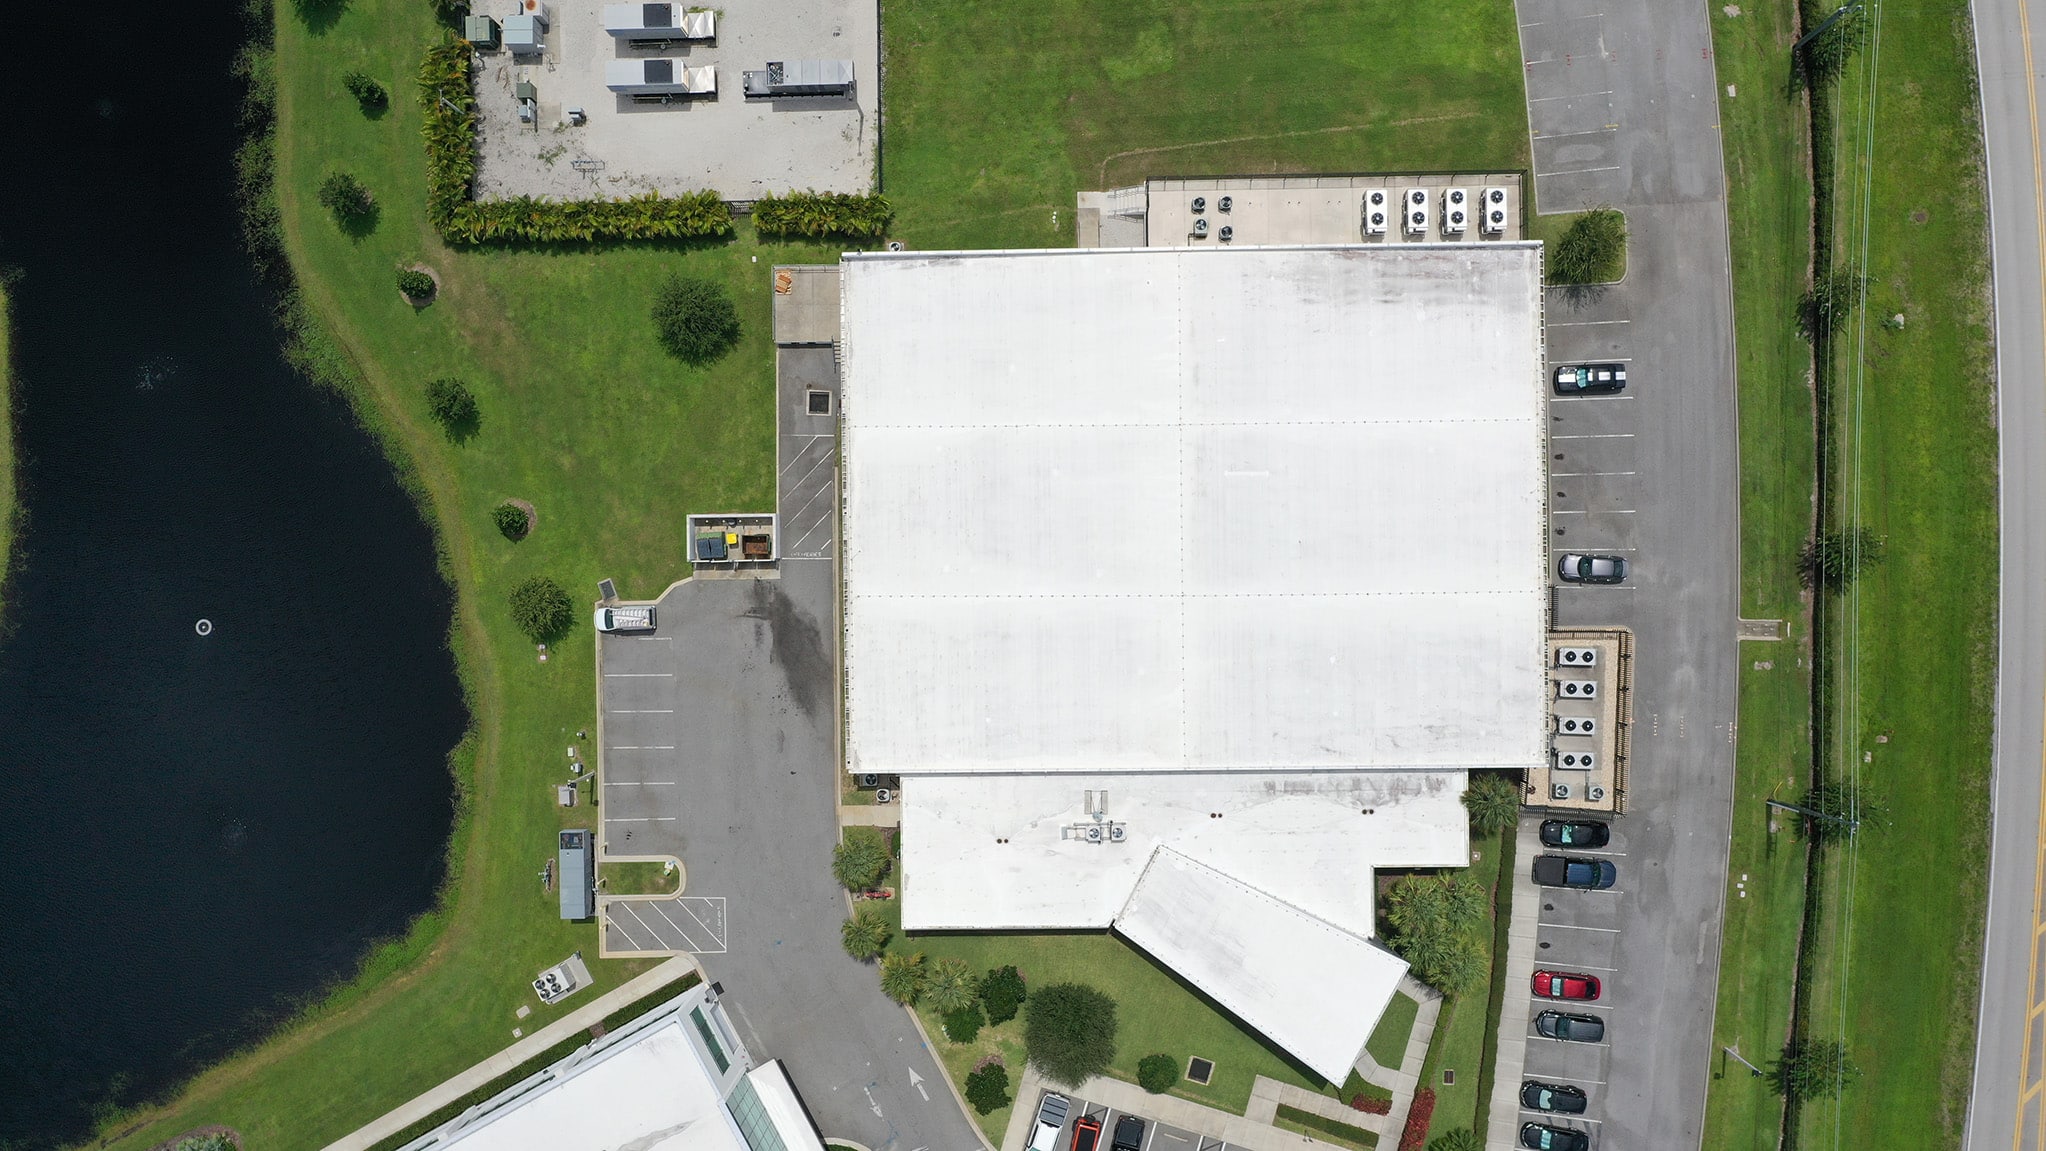 Aerial view of the data center